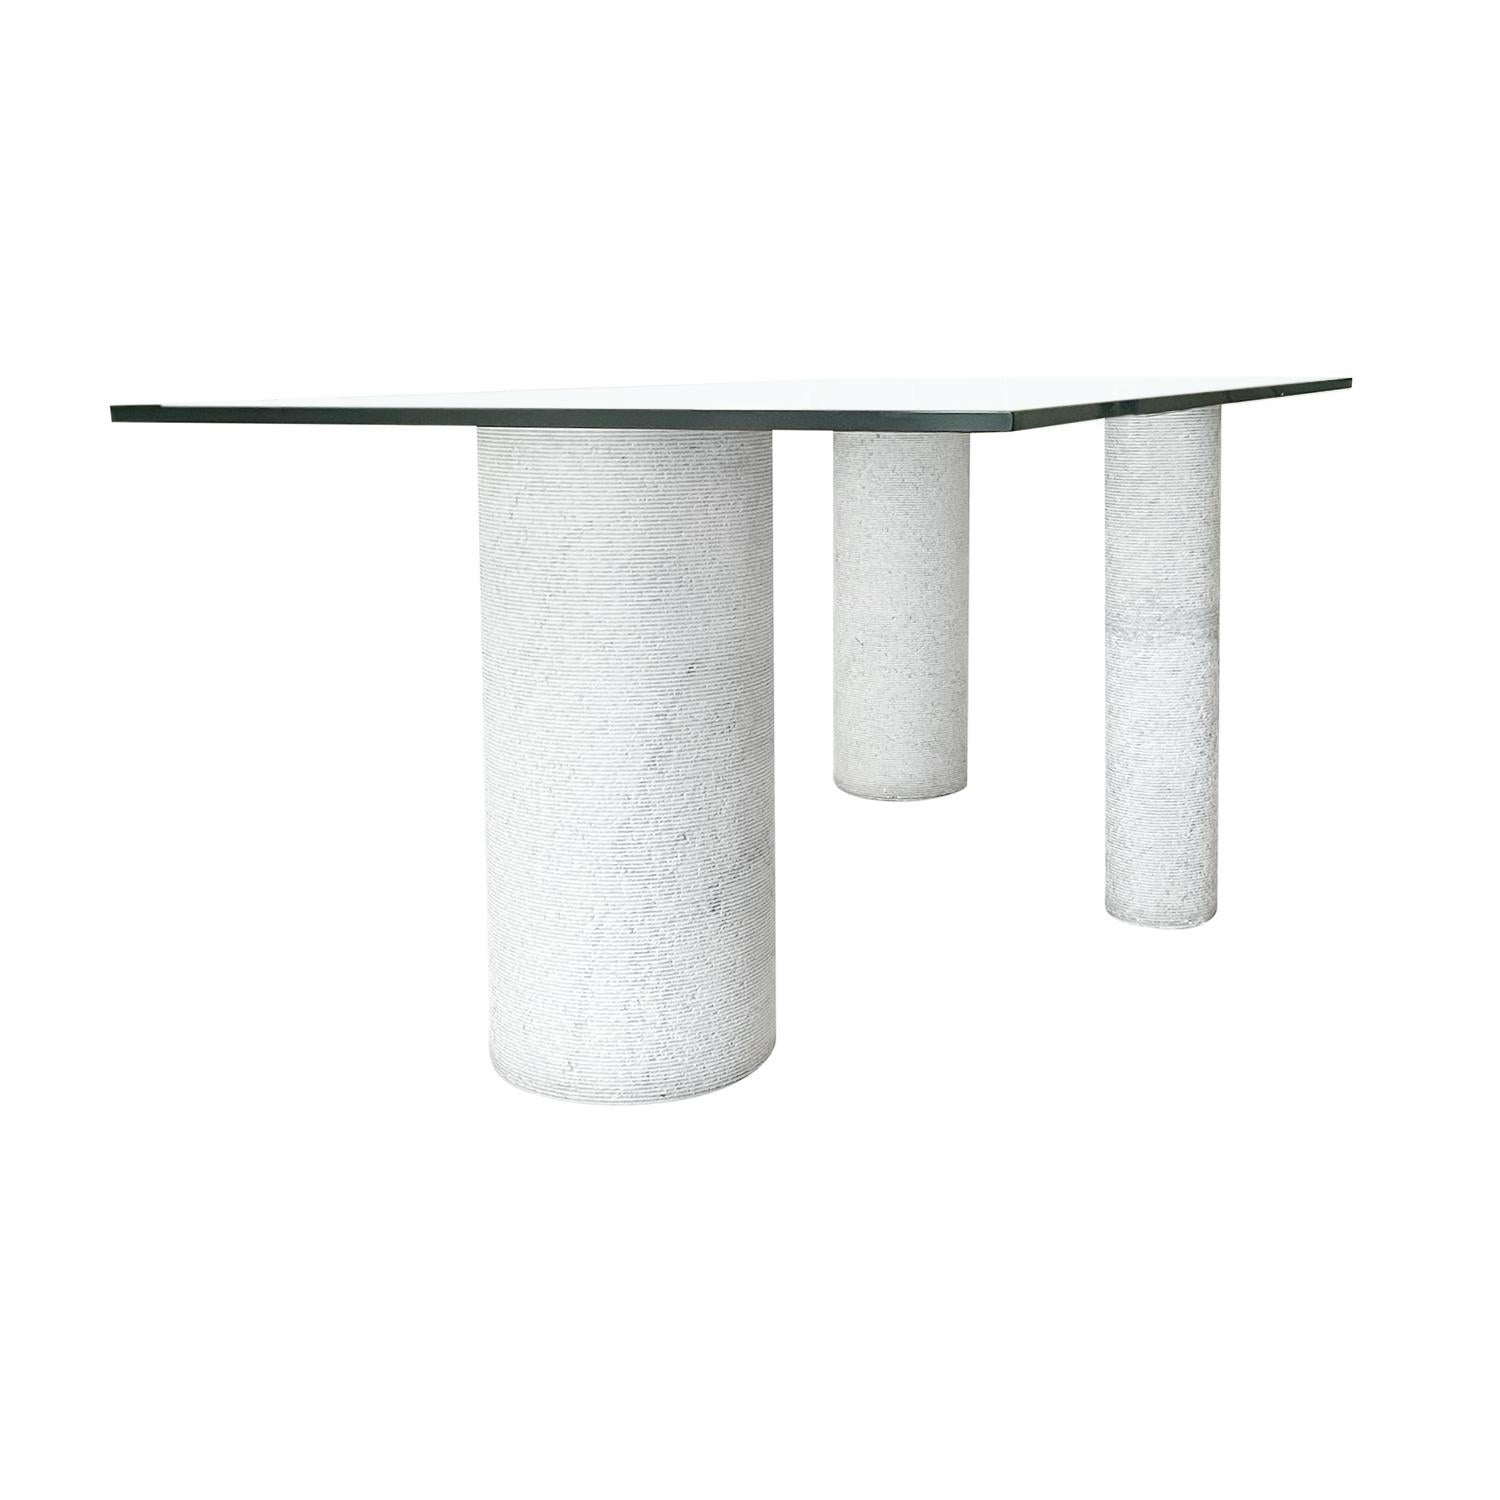 20th Century White Italian Marble, Glass Dining Room Table by Massimo Vignelli In Good Condition For Sale In West Palm Beach, FL